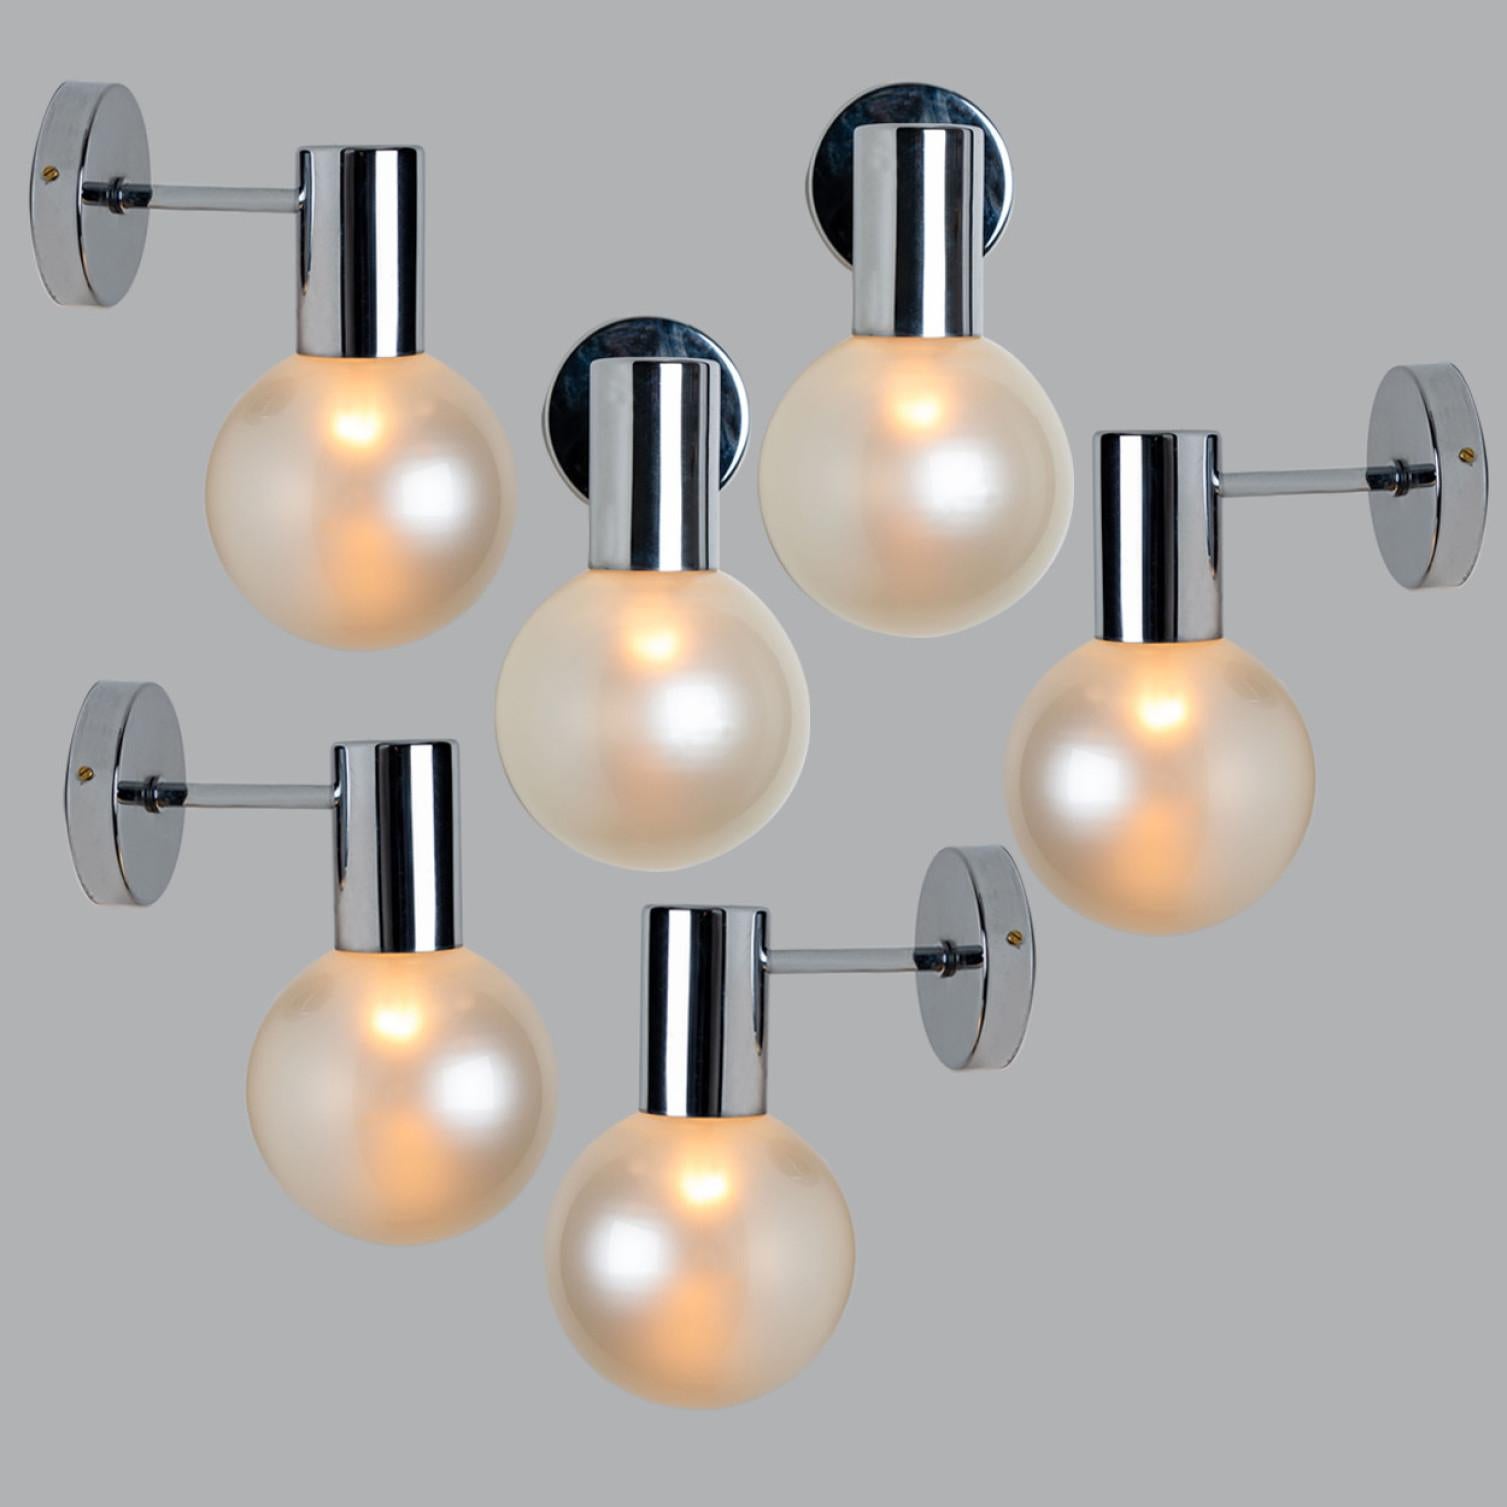 Large quantity of beautiful hand blown opal glass wall lights. Designed and manufactured by Glashütte Limburg, Germany around 1970.

Beautiful craftsmanship. These midcentury vintage lights feature a chrome base with a fine opal glass shade.